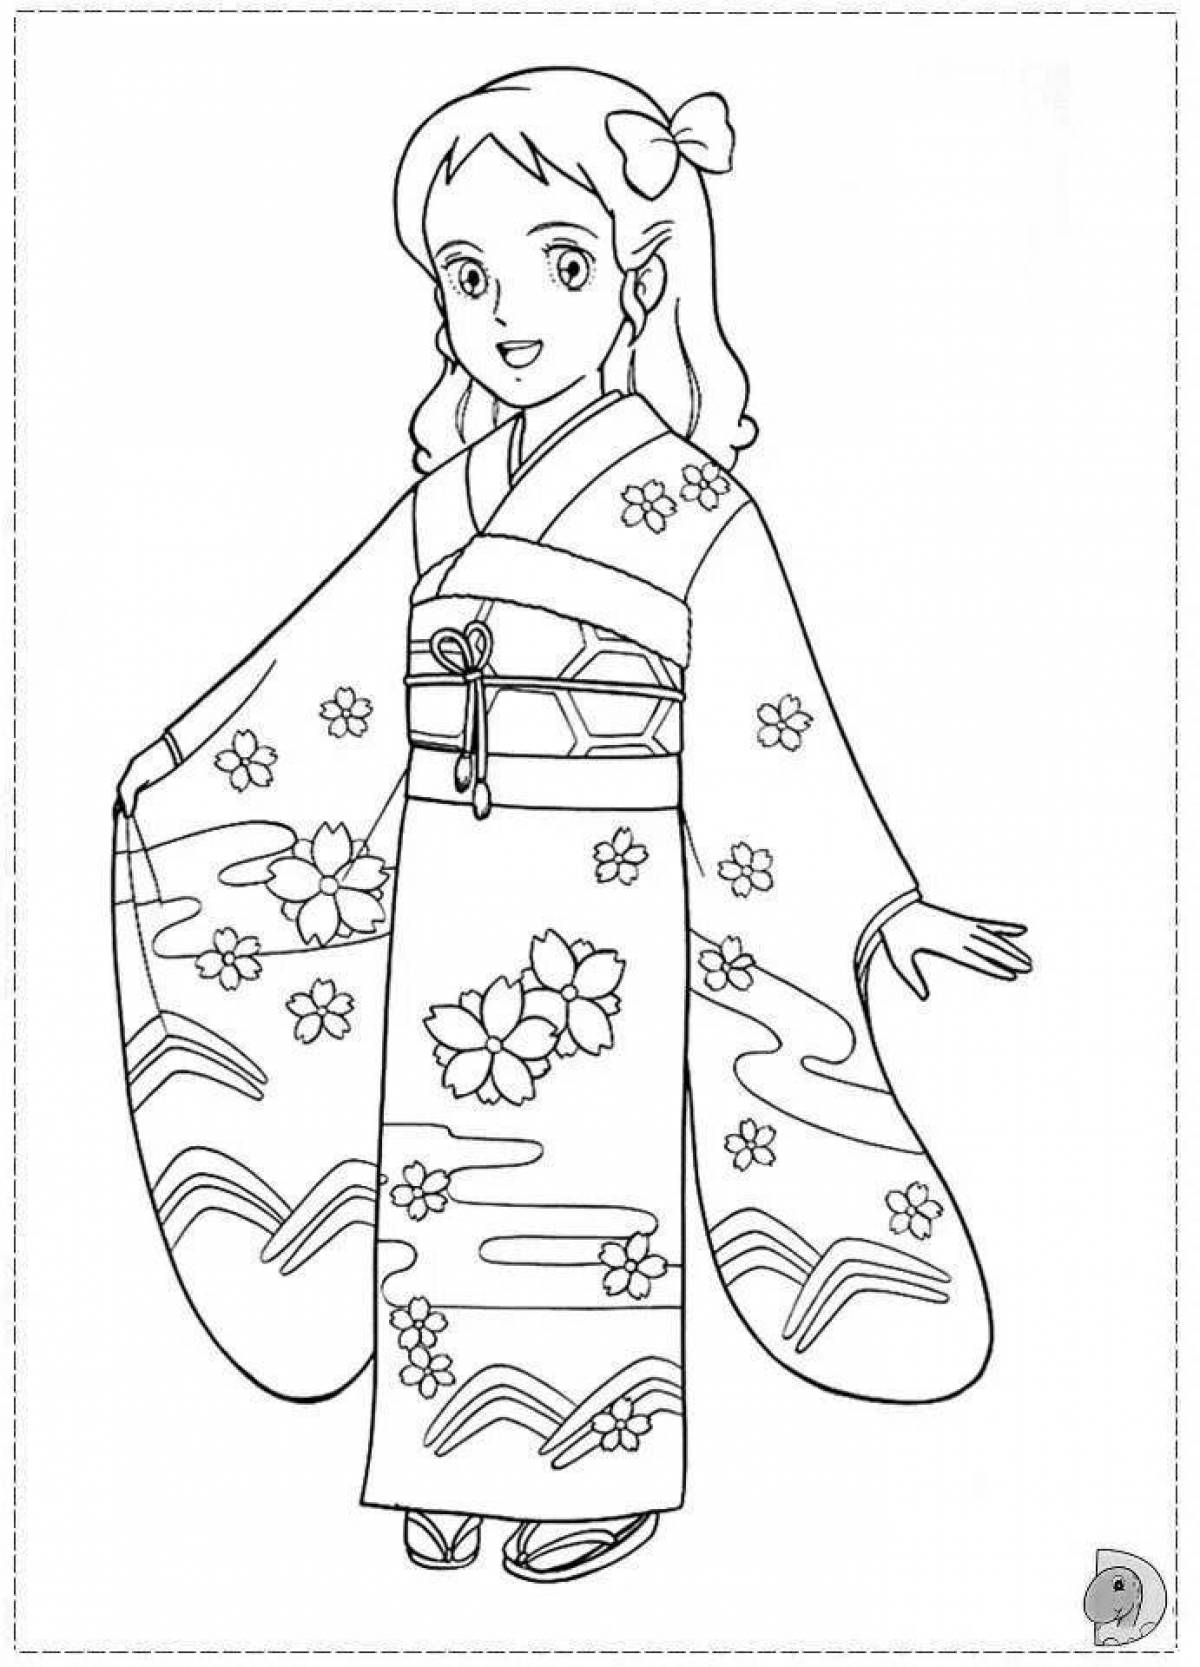 Exquisite Japanese coloring book